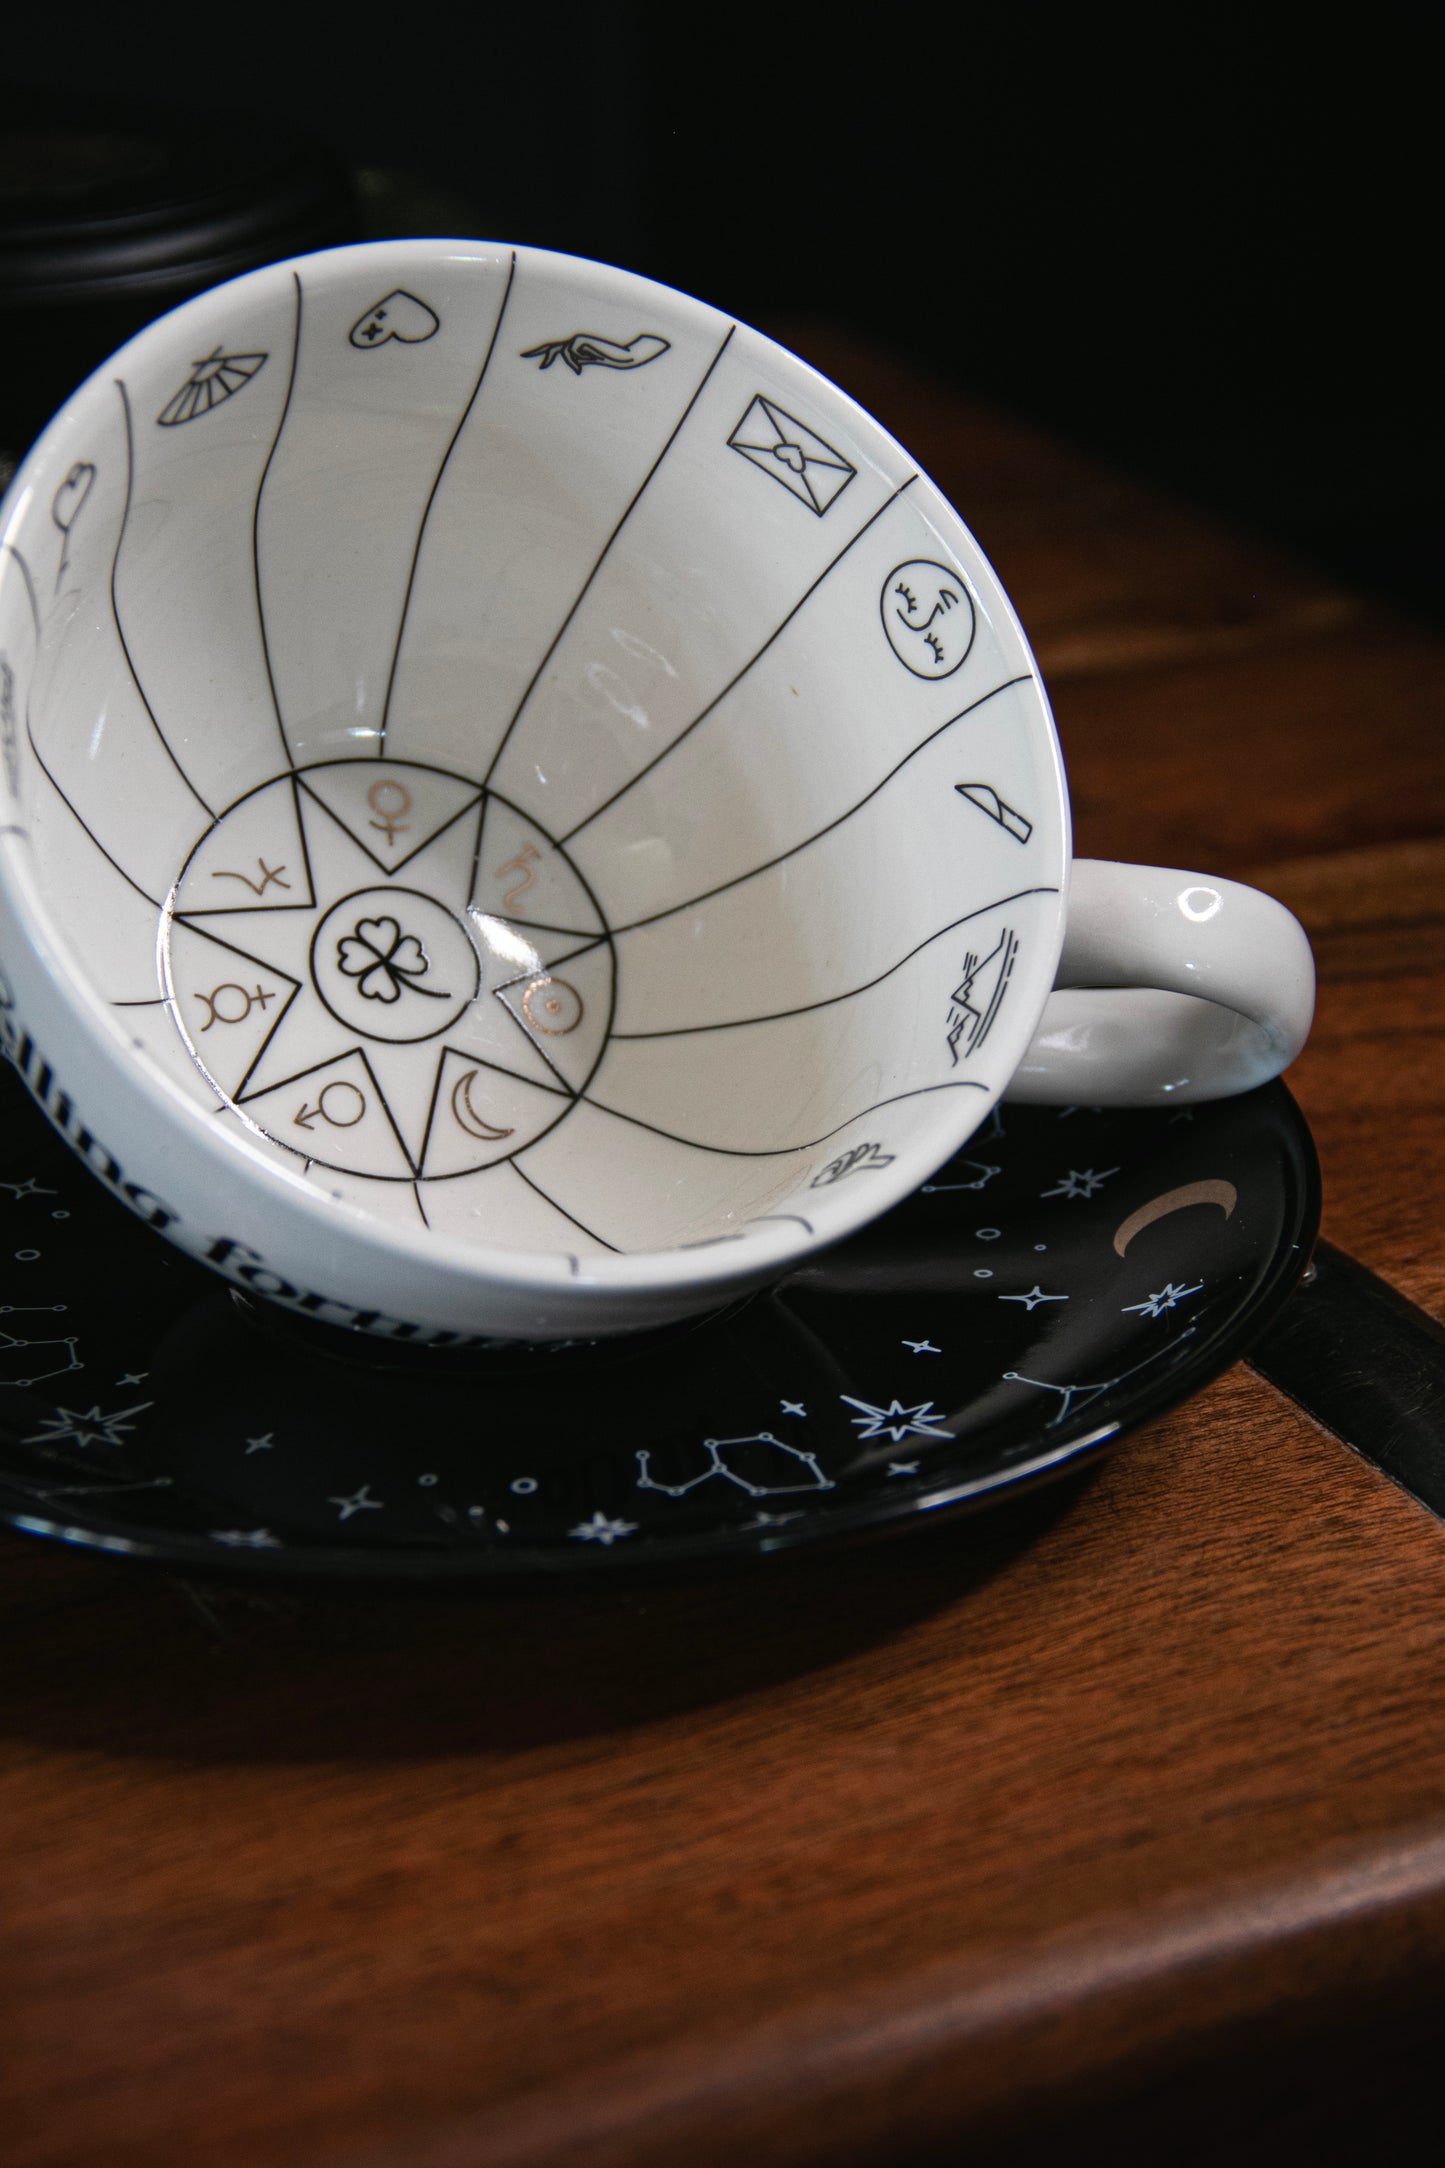 Fortune Telling Teacup